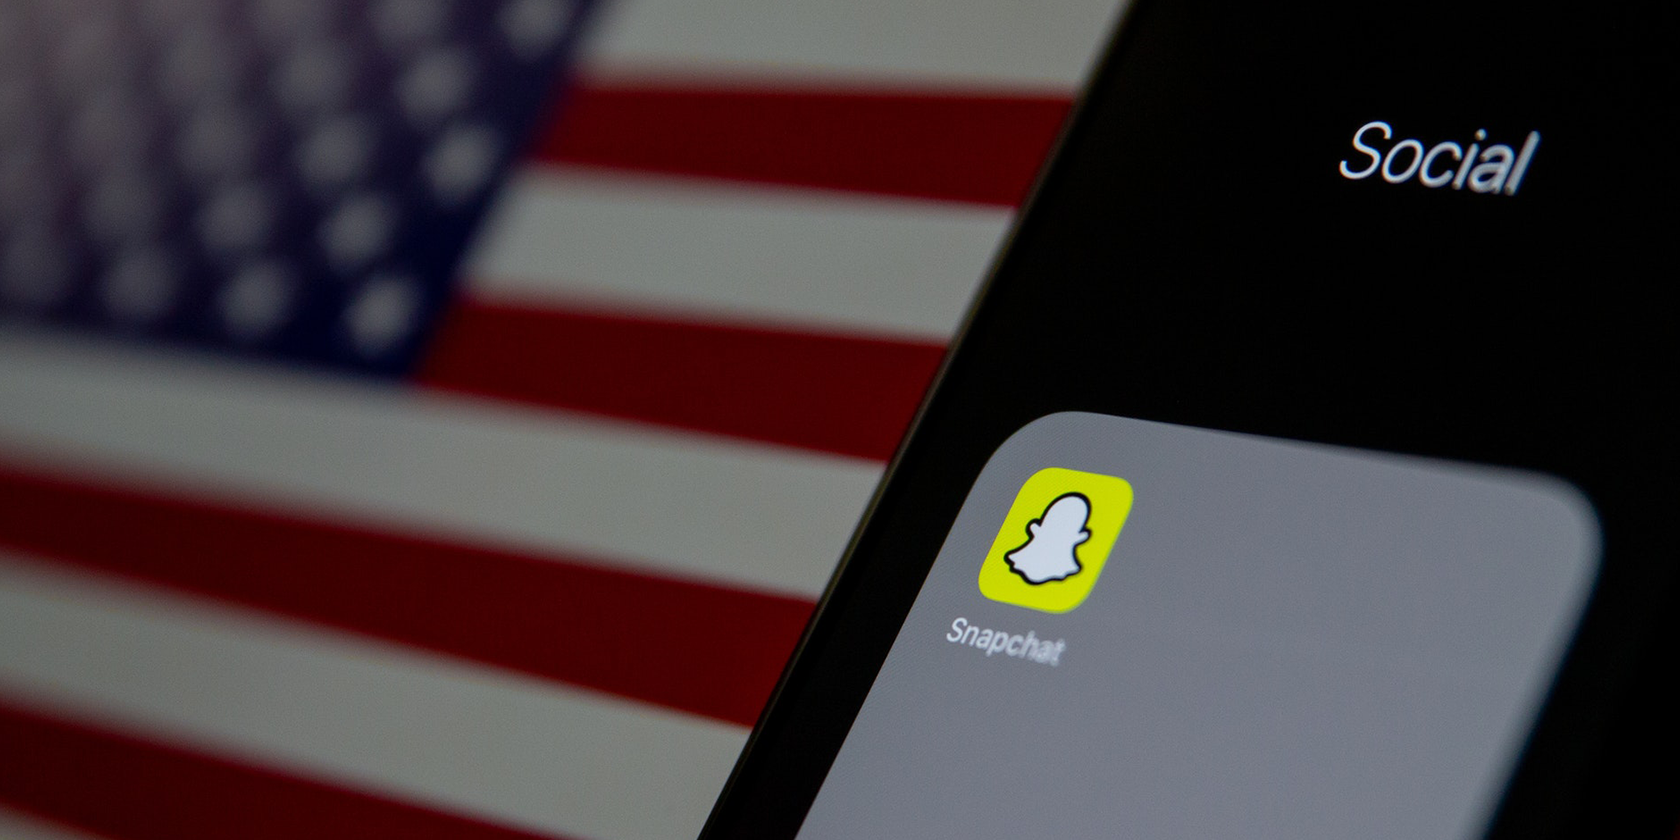 Snapchat app icon on iPhone in front of the US flag